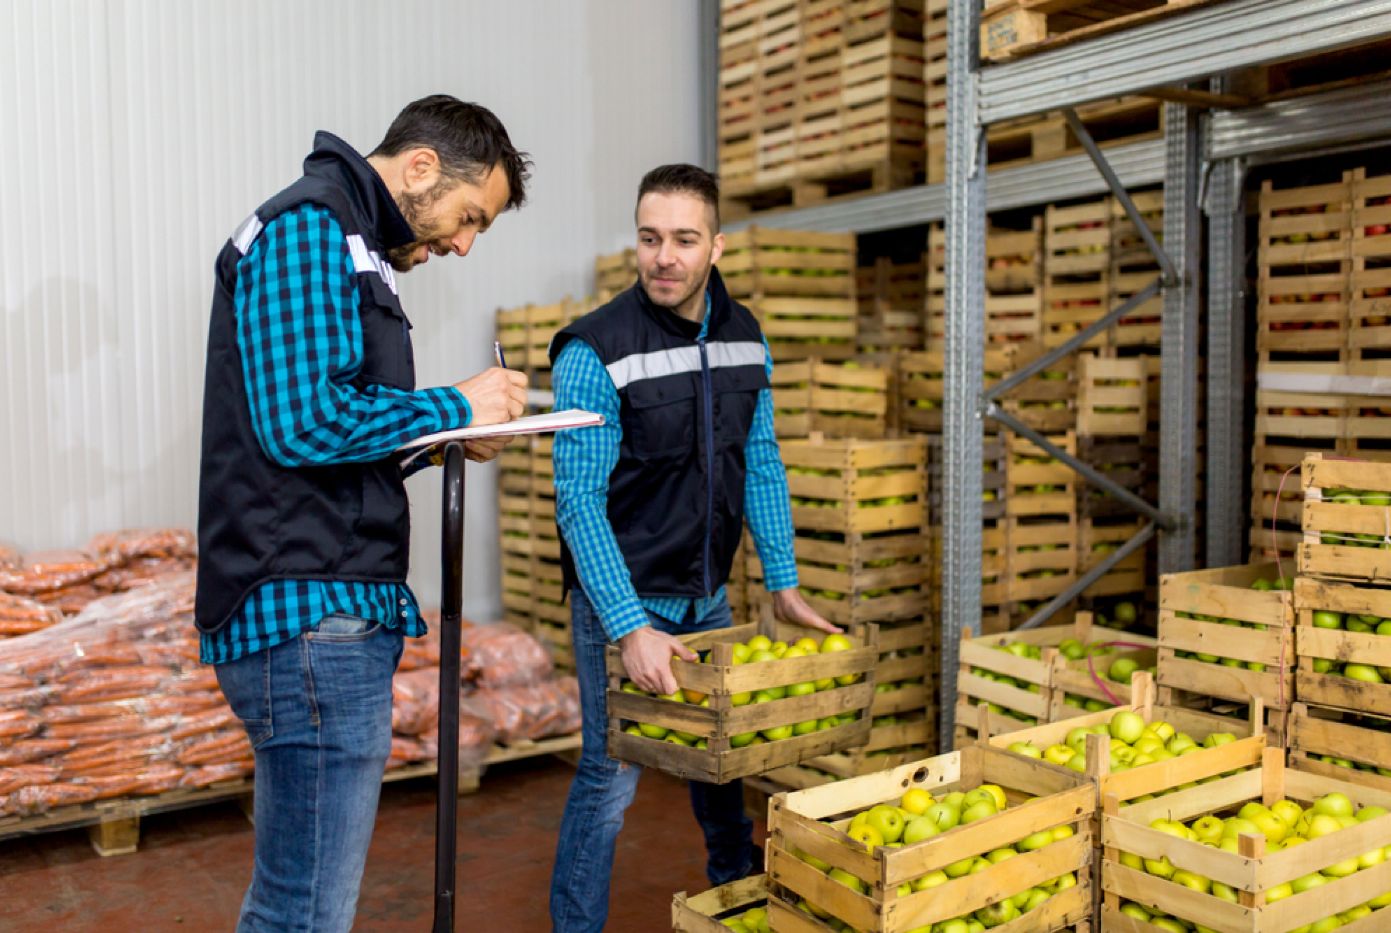 Workers checking crates of produce